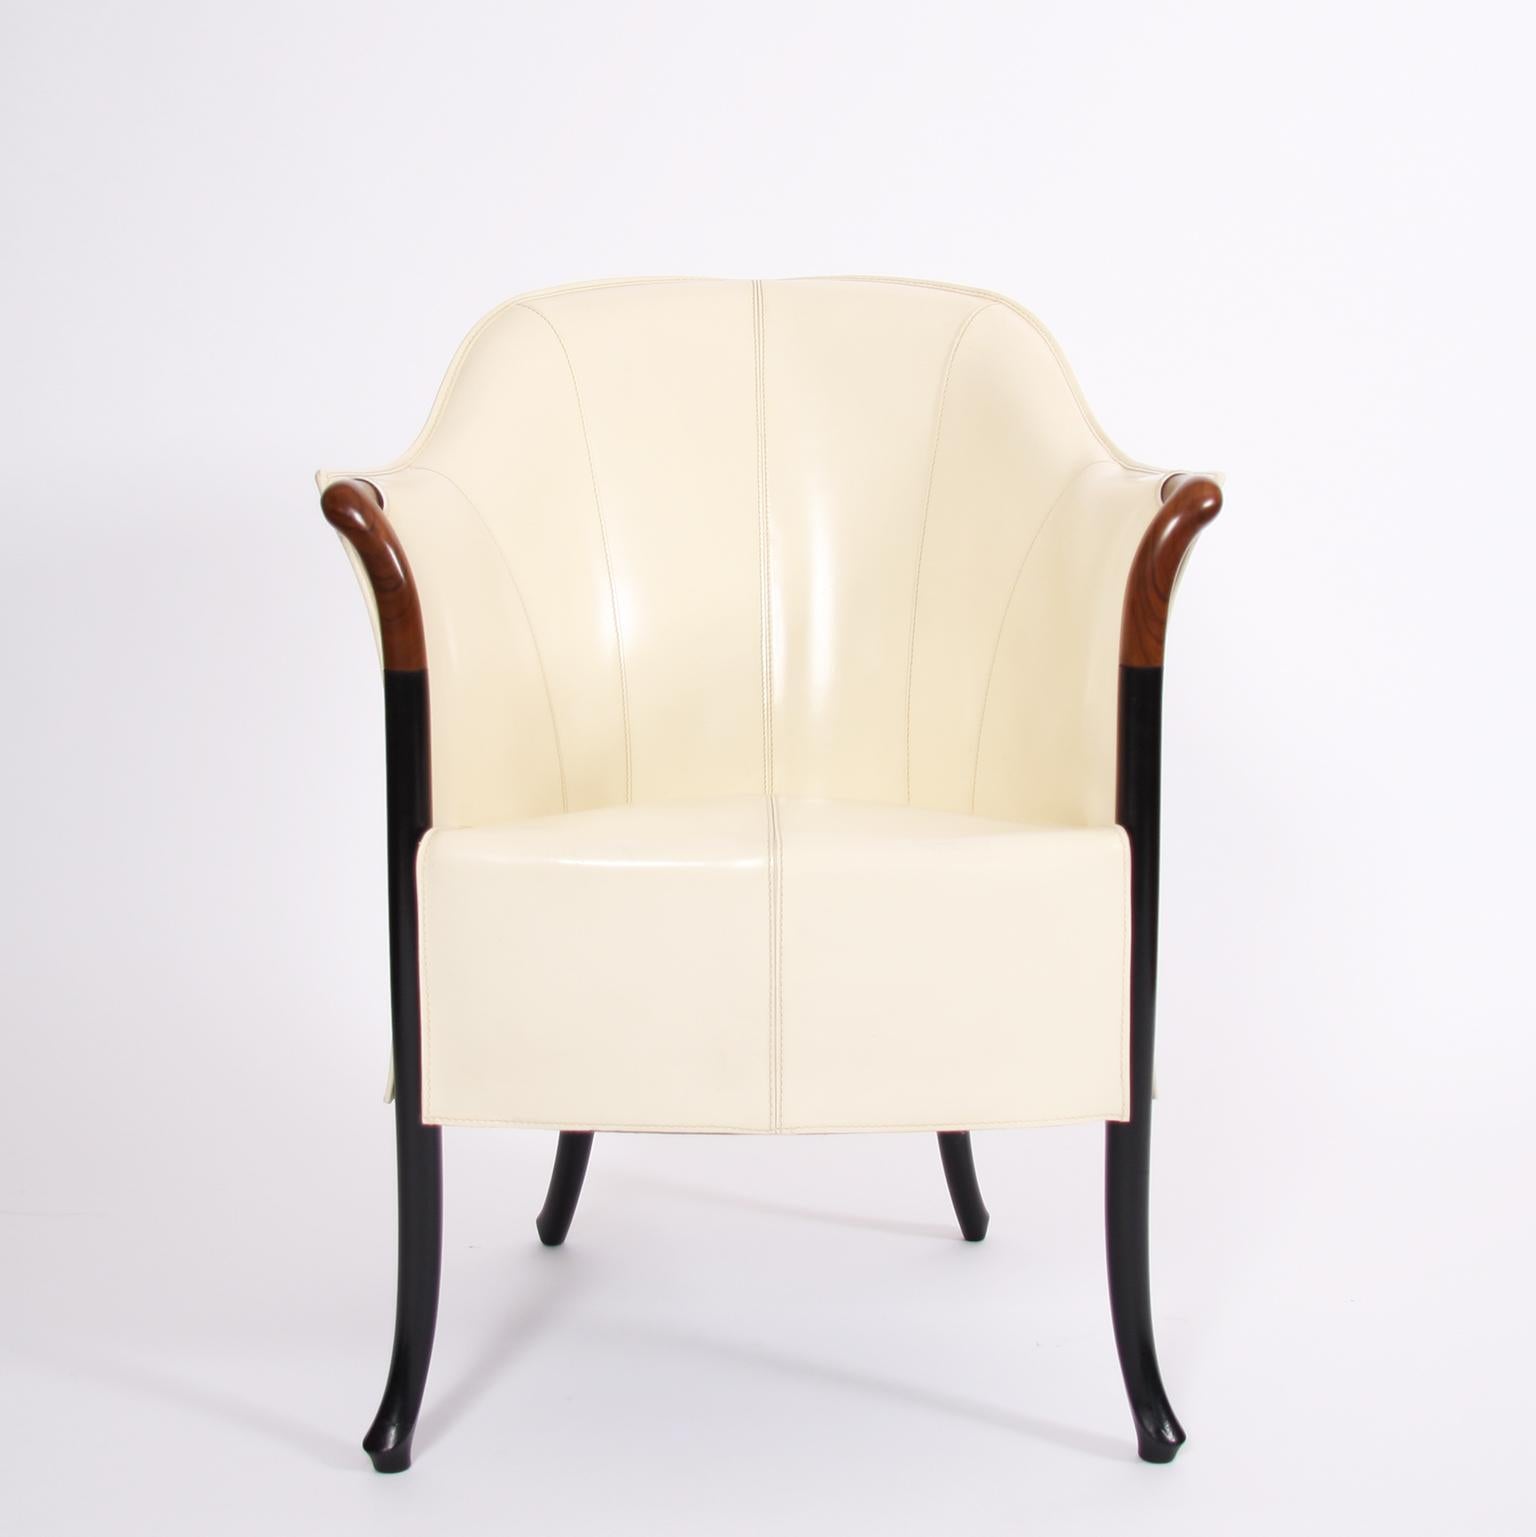 Italian, circa 1980

An elegant single leather armchair, by Italian maker Giorgetti, in cream. Exquisite stitching detail.

In excellent condition.

This quality armchair 'Progetti', by first class furniture manufacturer Giorgetti Italia, is